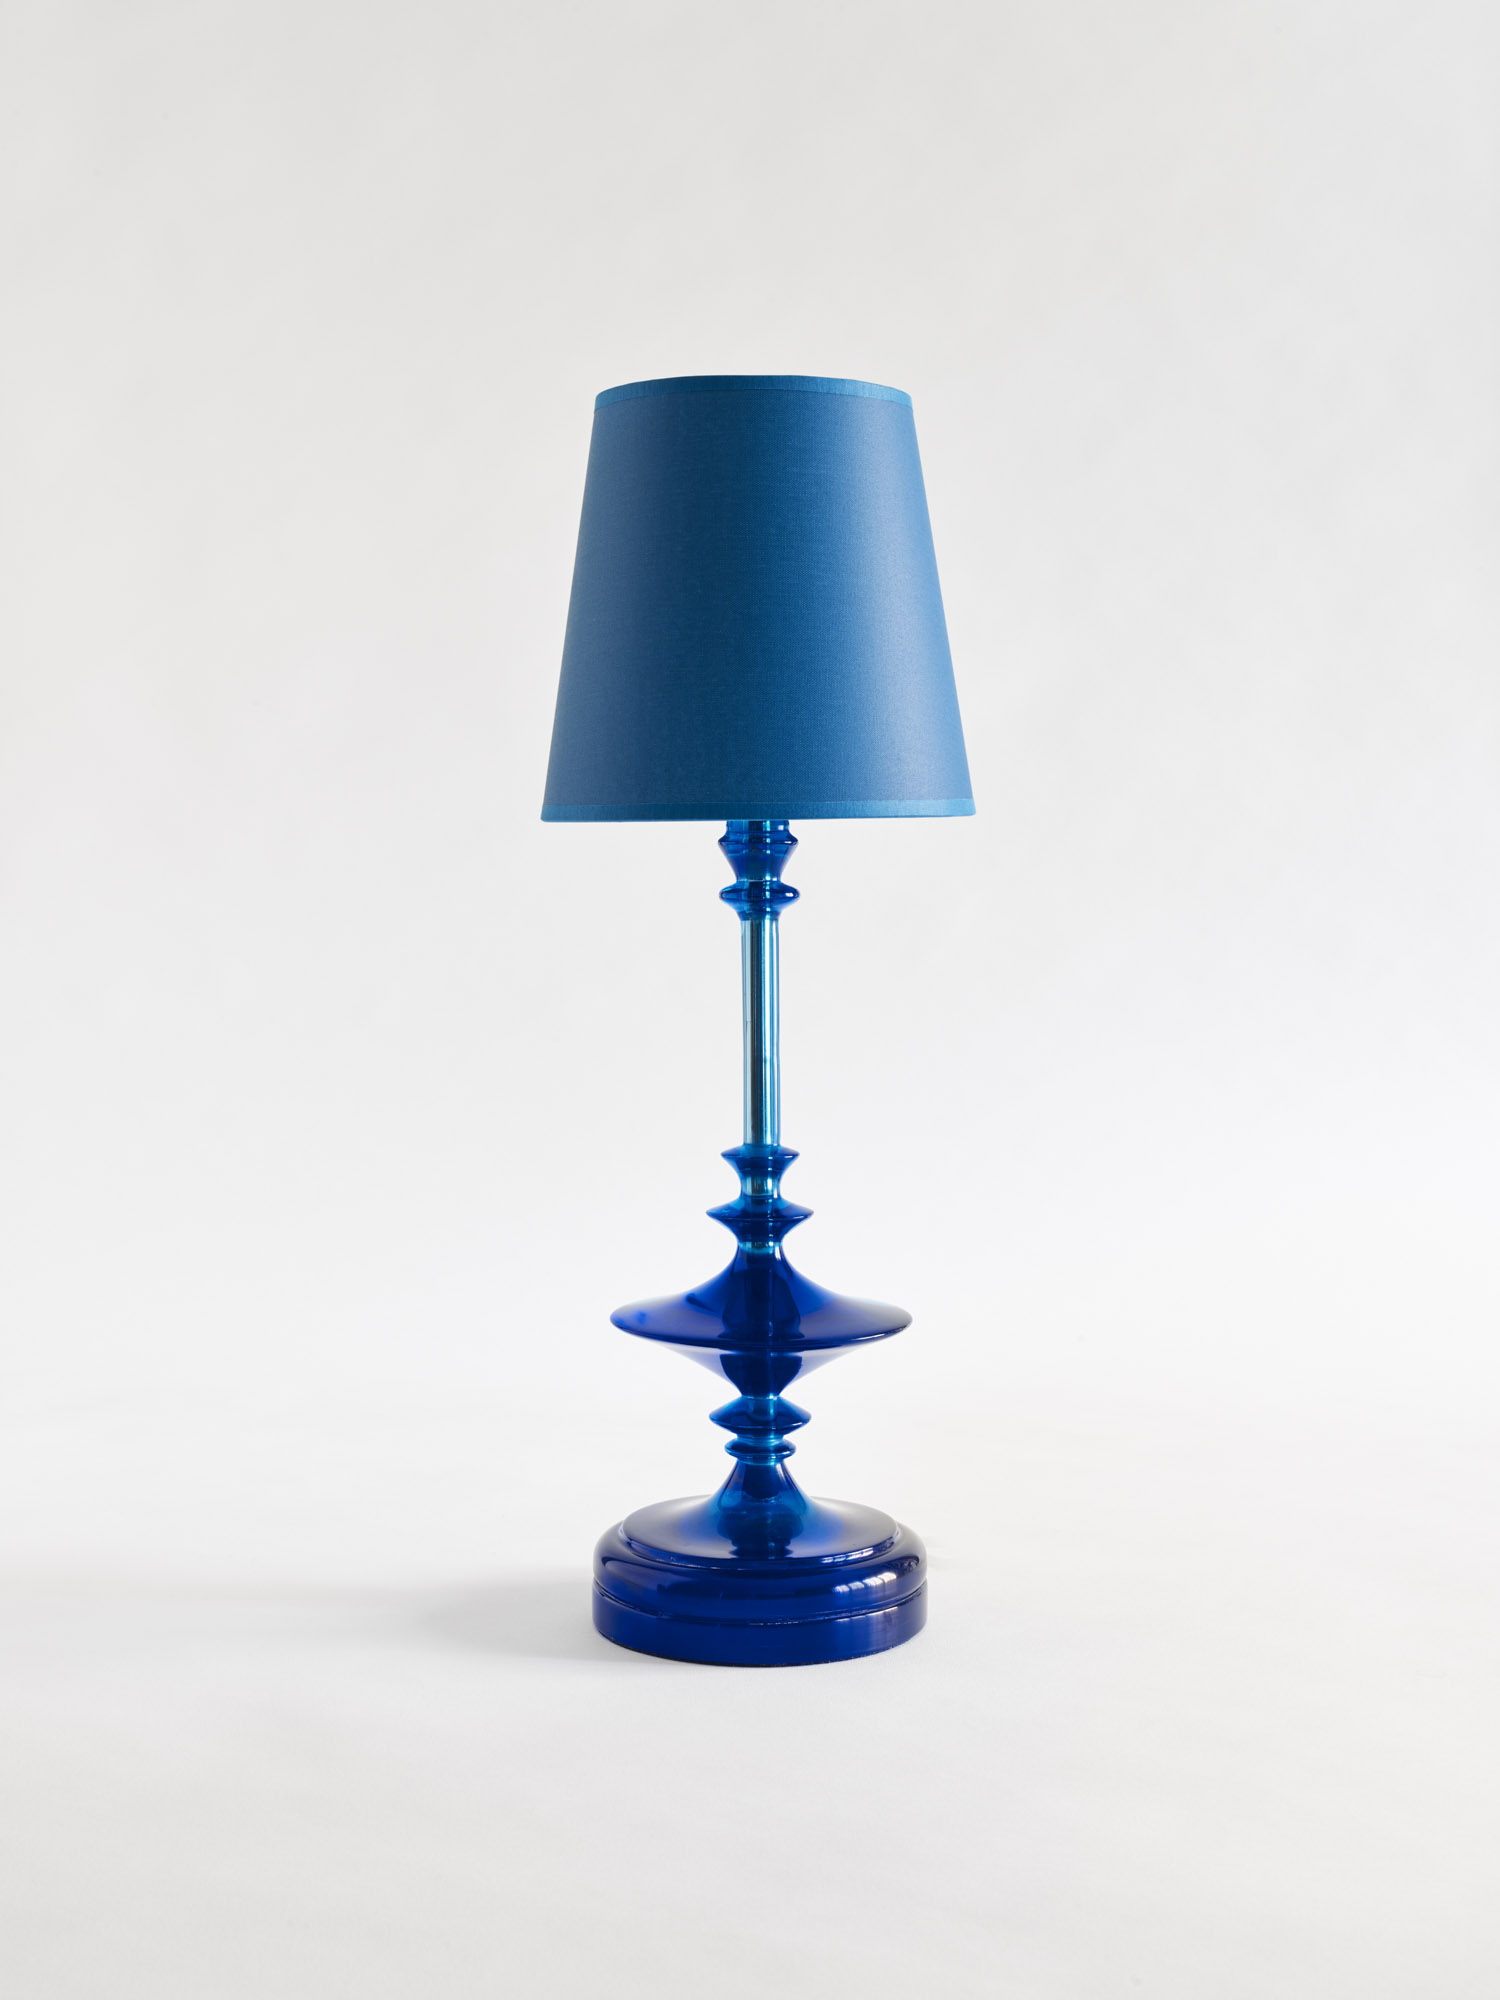 An image from Marianna Kennedy's Flying Saucer Lamp